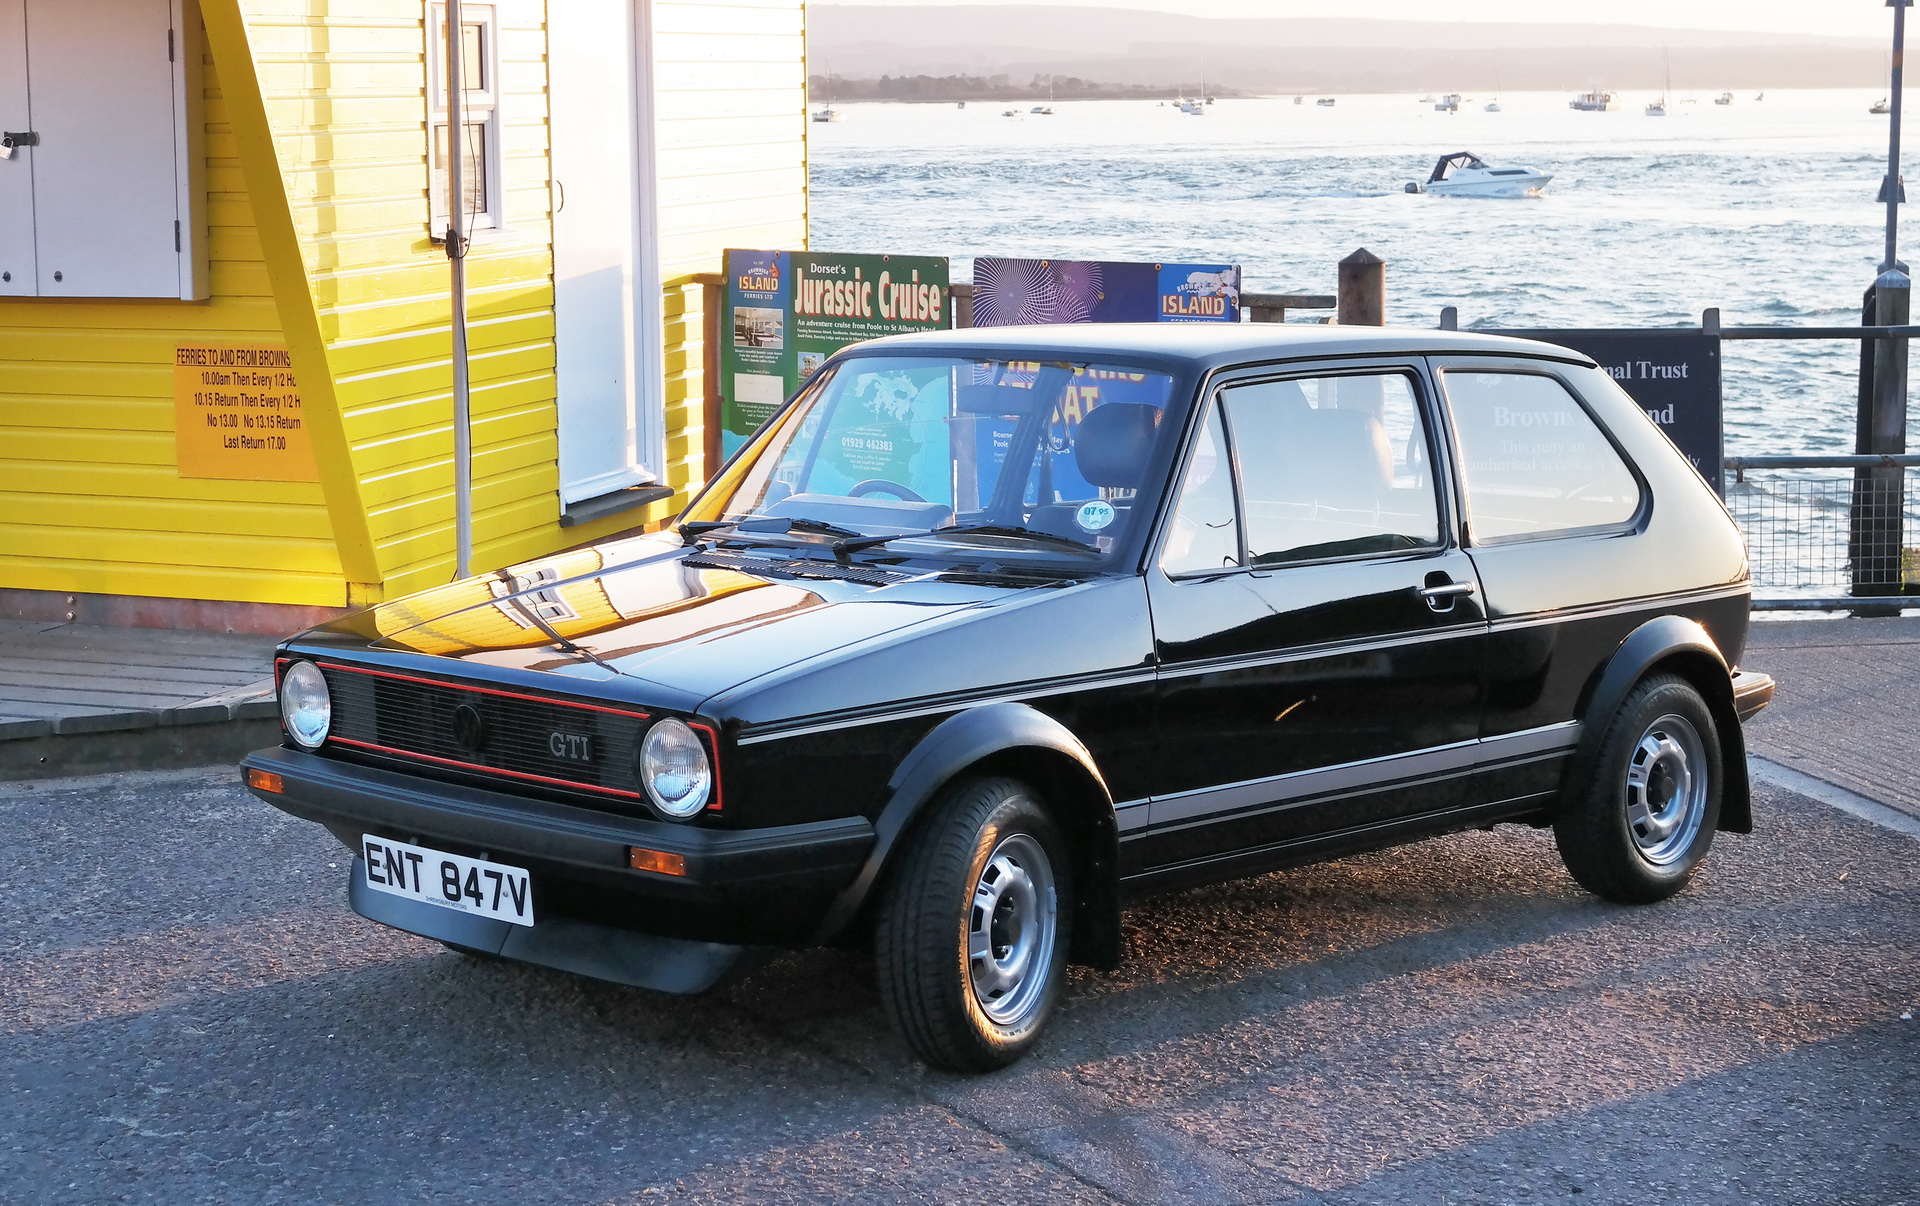 Altaar kiem Reinig de vloer Look All You Want, But You (Likely) Won't Find A Better Original VW Golf GTI  Mk1 On Sale Than This | Carscoops